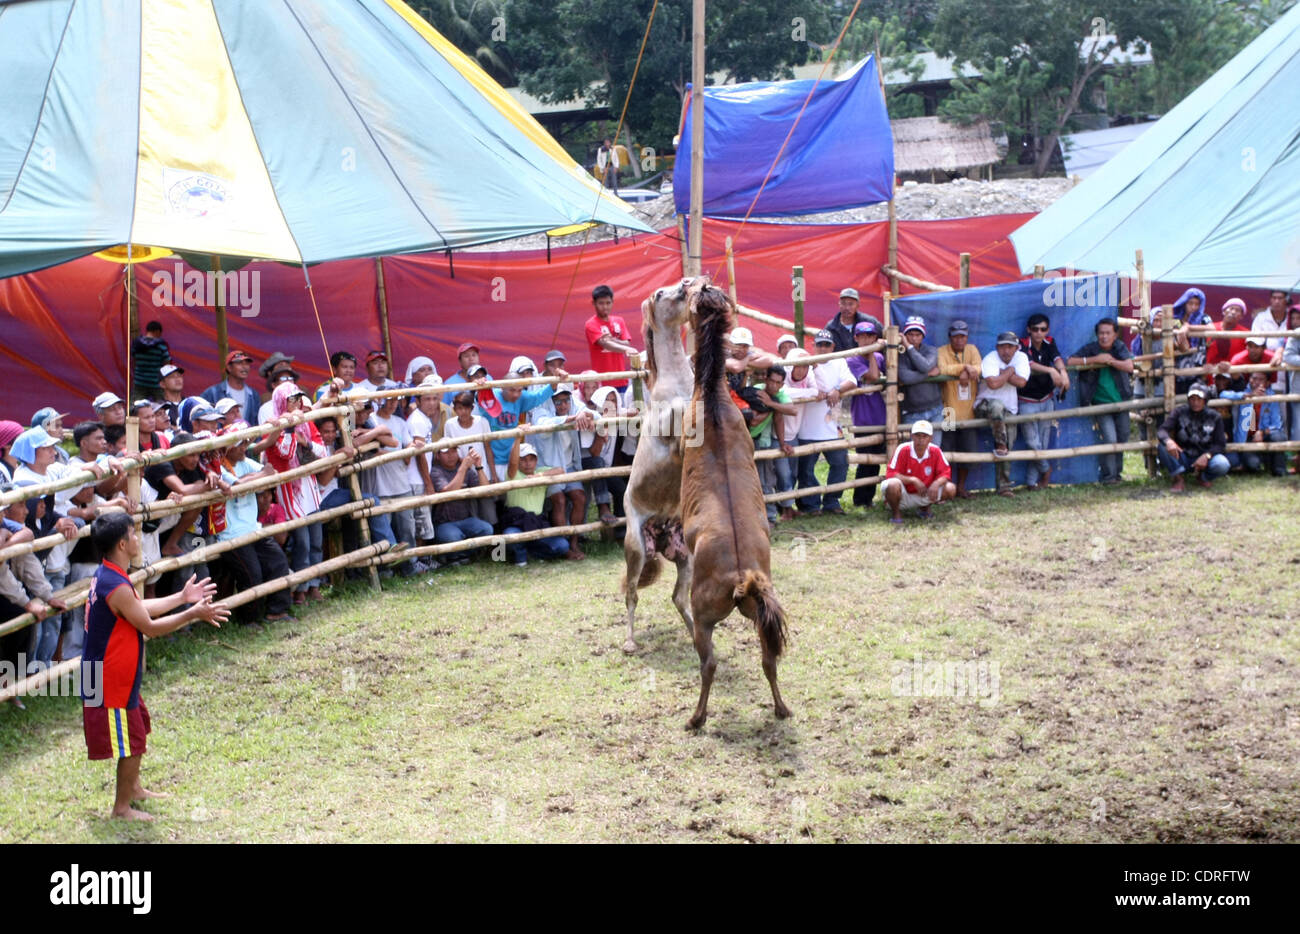 July 14, 2011 - Lake Sebu, Philippines - Locals watch cruel and barbaric horse fighting in Lake Sebu, a small town in the southern Philippines. The event was part of Tnalak Festival of South Cotabato province. Stallions were forced to fight to the death. The savagery was banned 13 years ago but stil Stock Photo